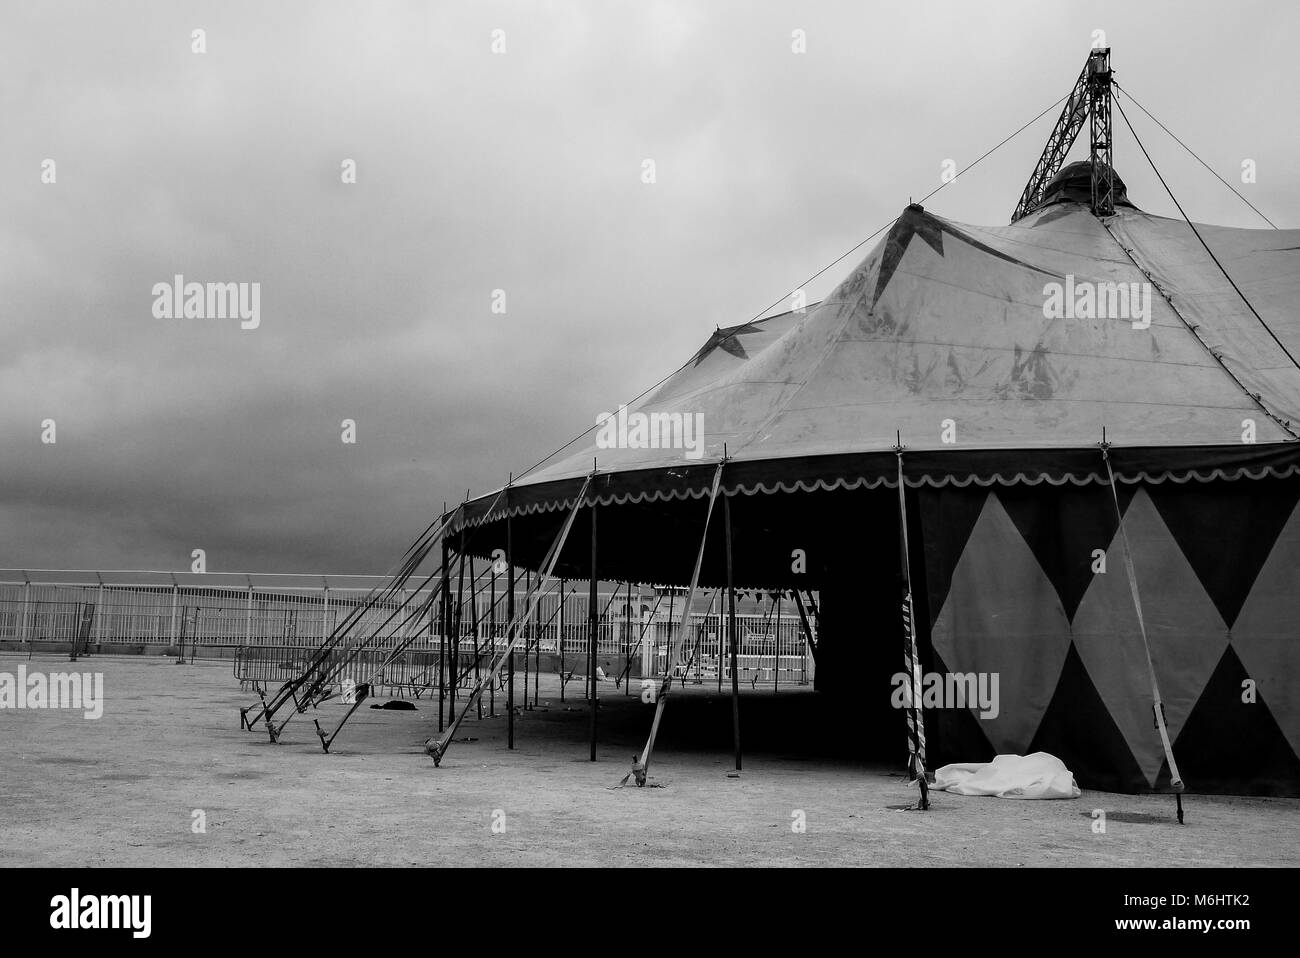 Circus tent Black and White Stock Photos & Images - Alamy